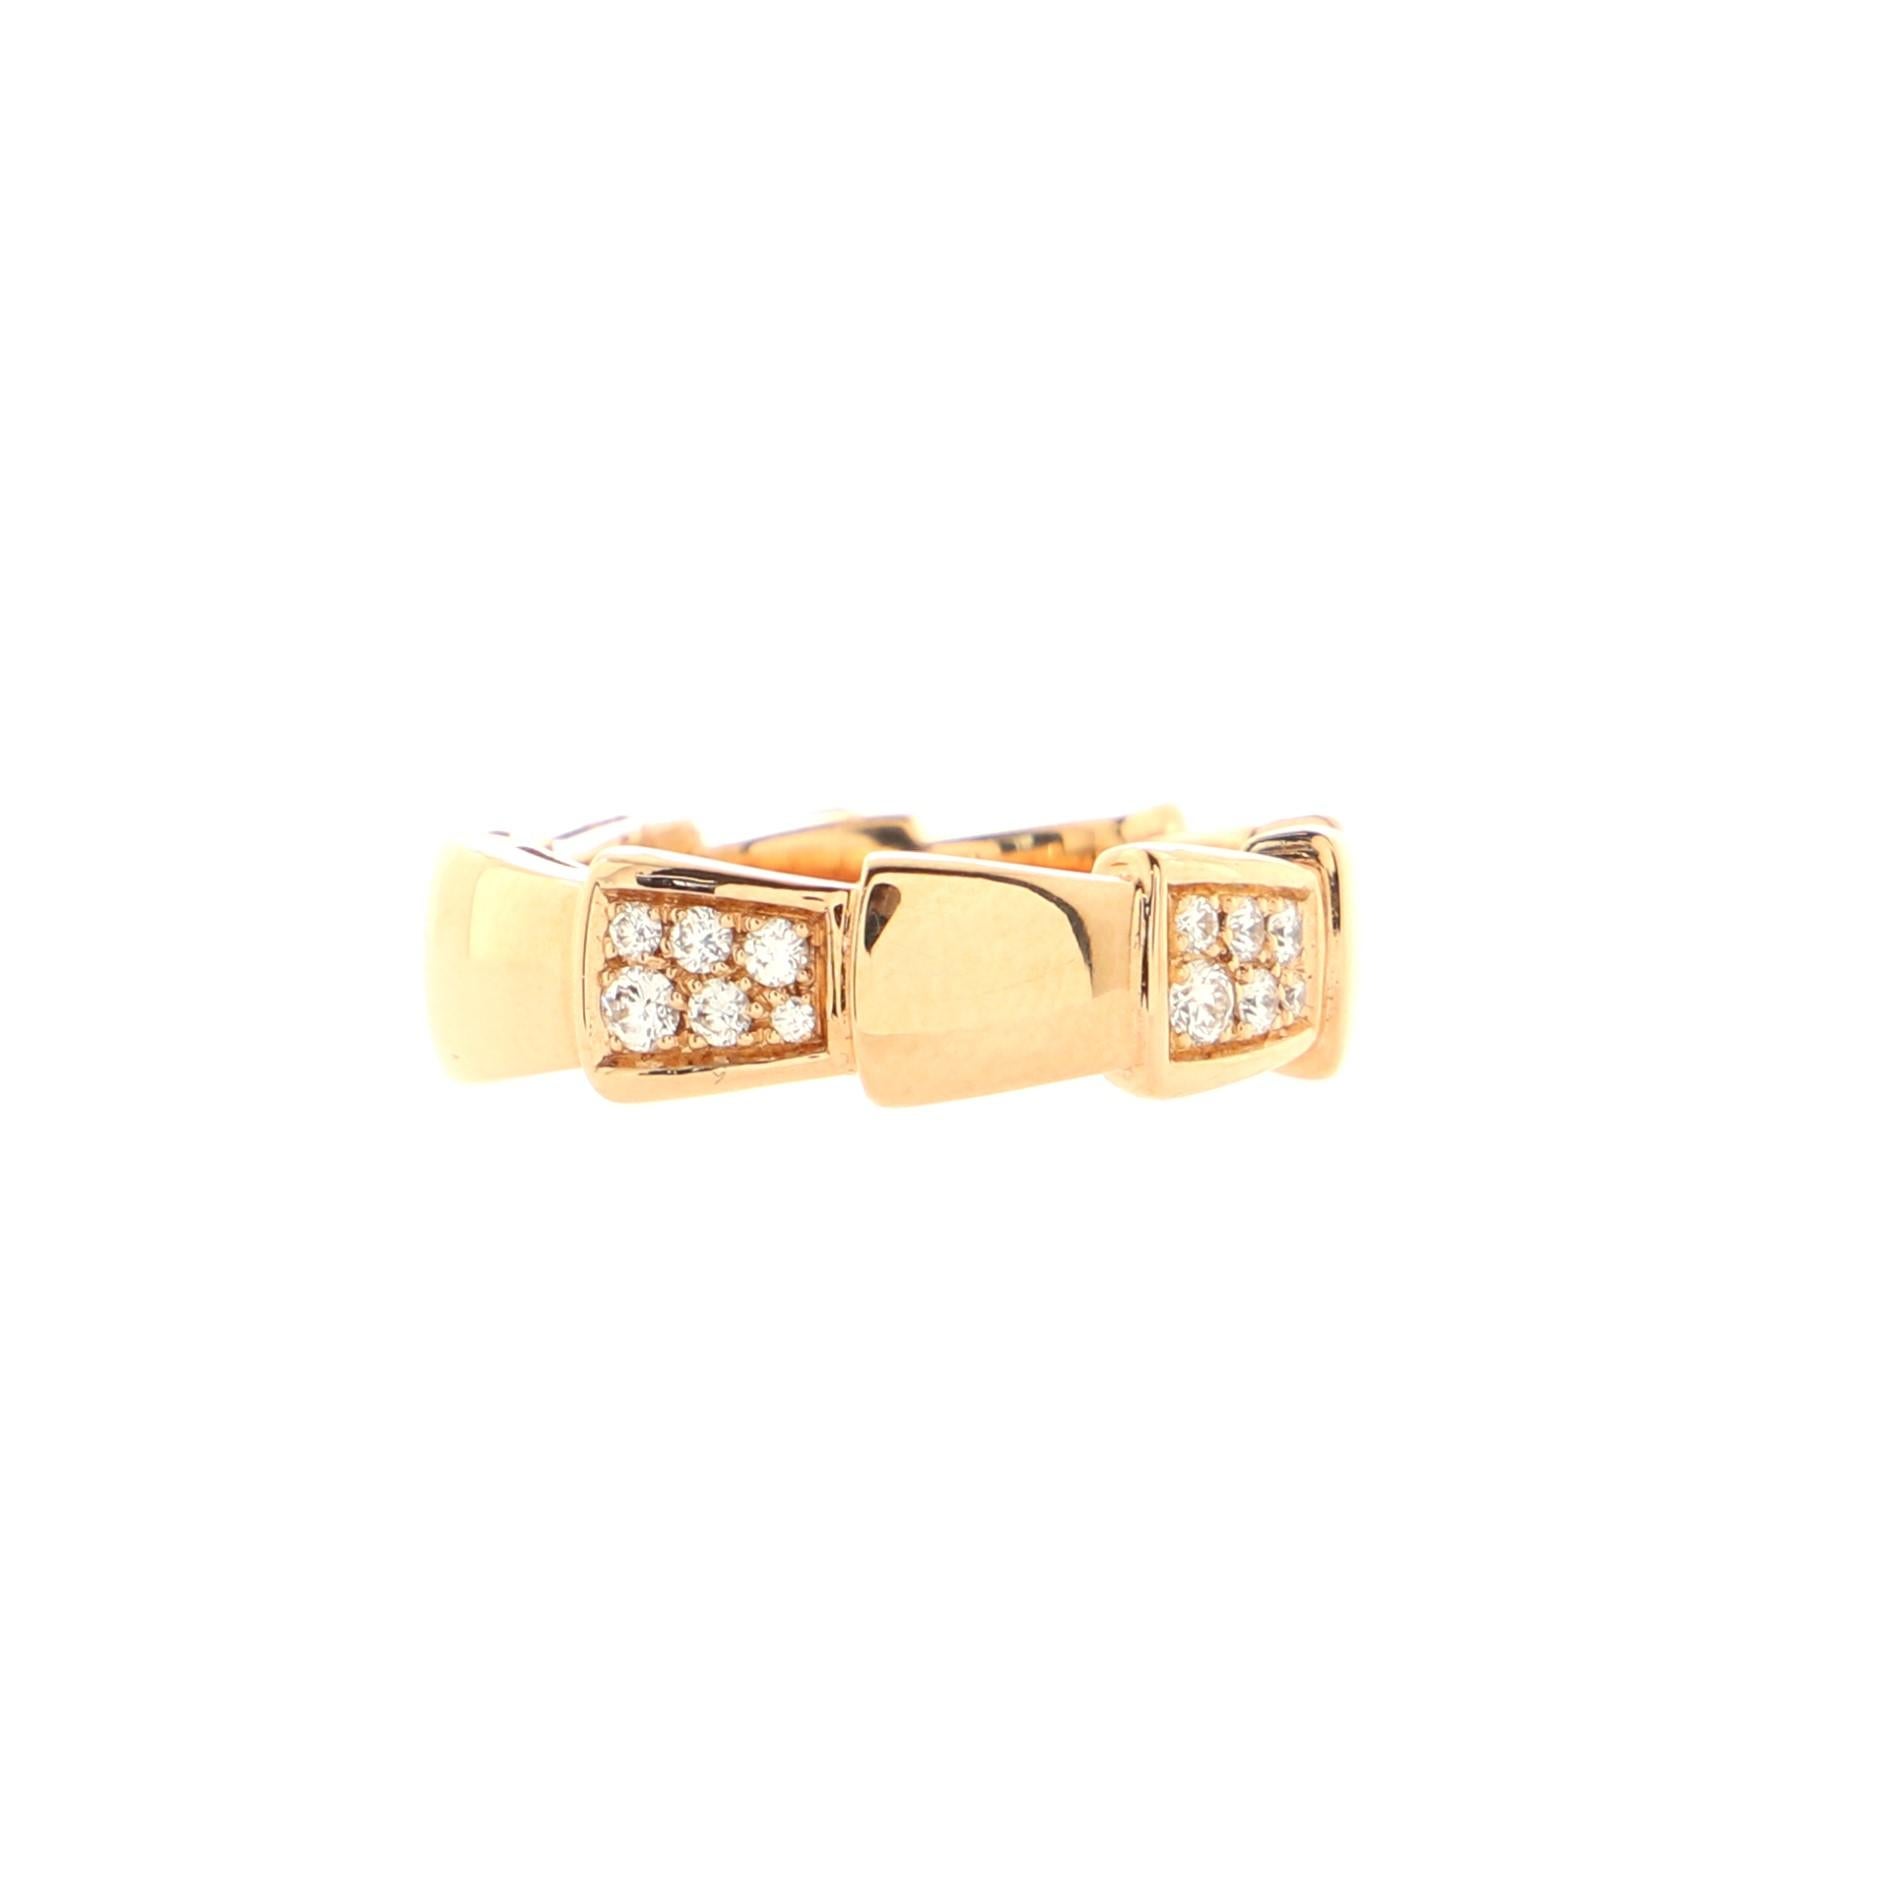 Condition: Great. Minor scratches throughout.
Accessories: No Accessories
Measurements: Size: 4.75 - 49, Width: 5.50 mm
Designer: Bvlgari
Model: Serpenti Viper Ring 18K Rose Gold and Diamonds
Exterior Color: Rose Gold
Item Number: 137105/3